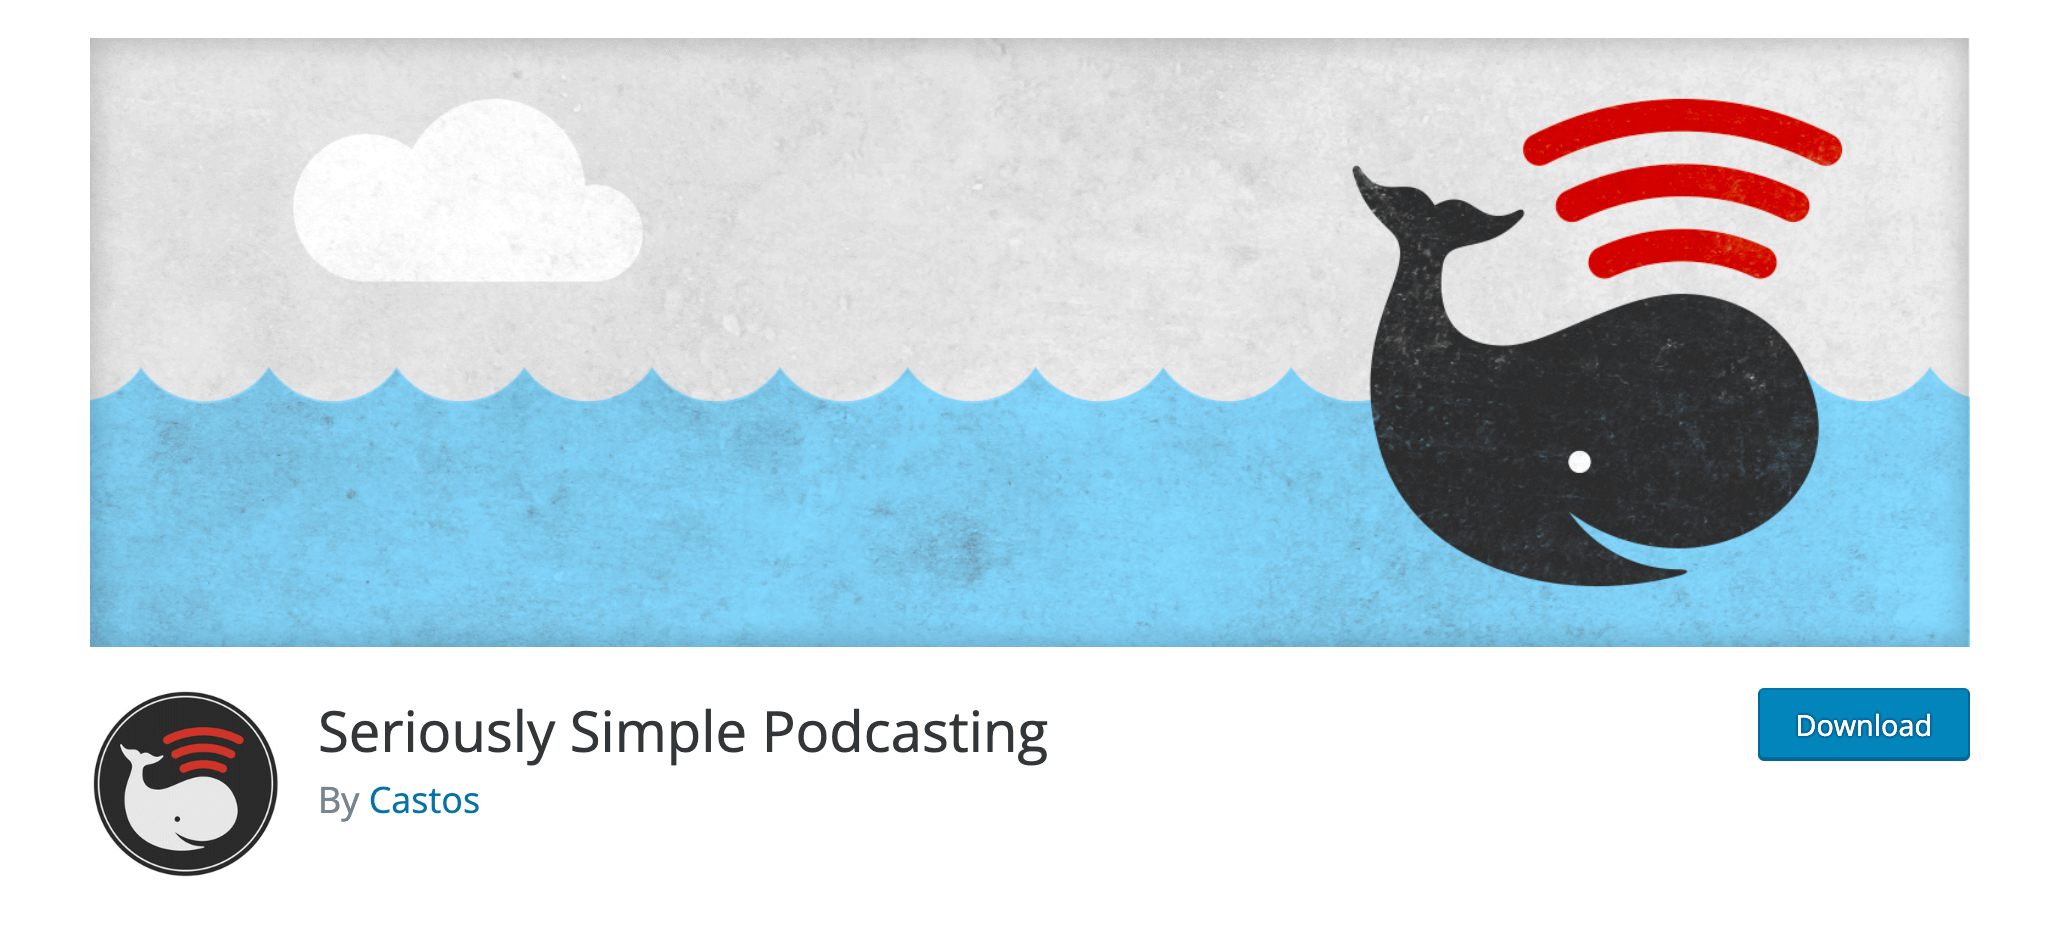 Das WordPress Podcast Plugin Seriously Simple Podcasting by Castros